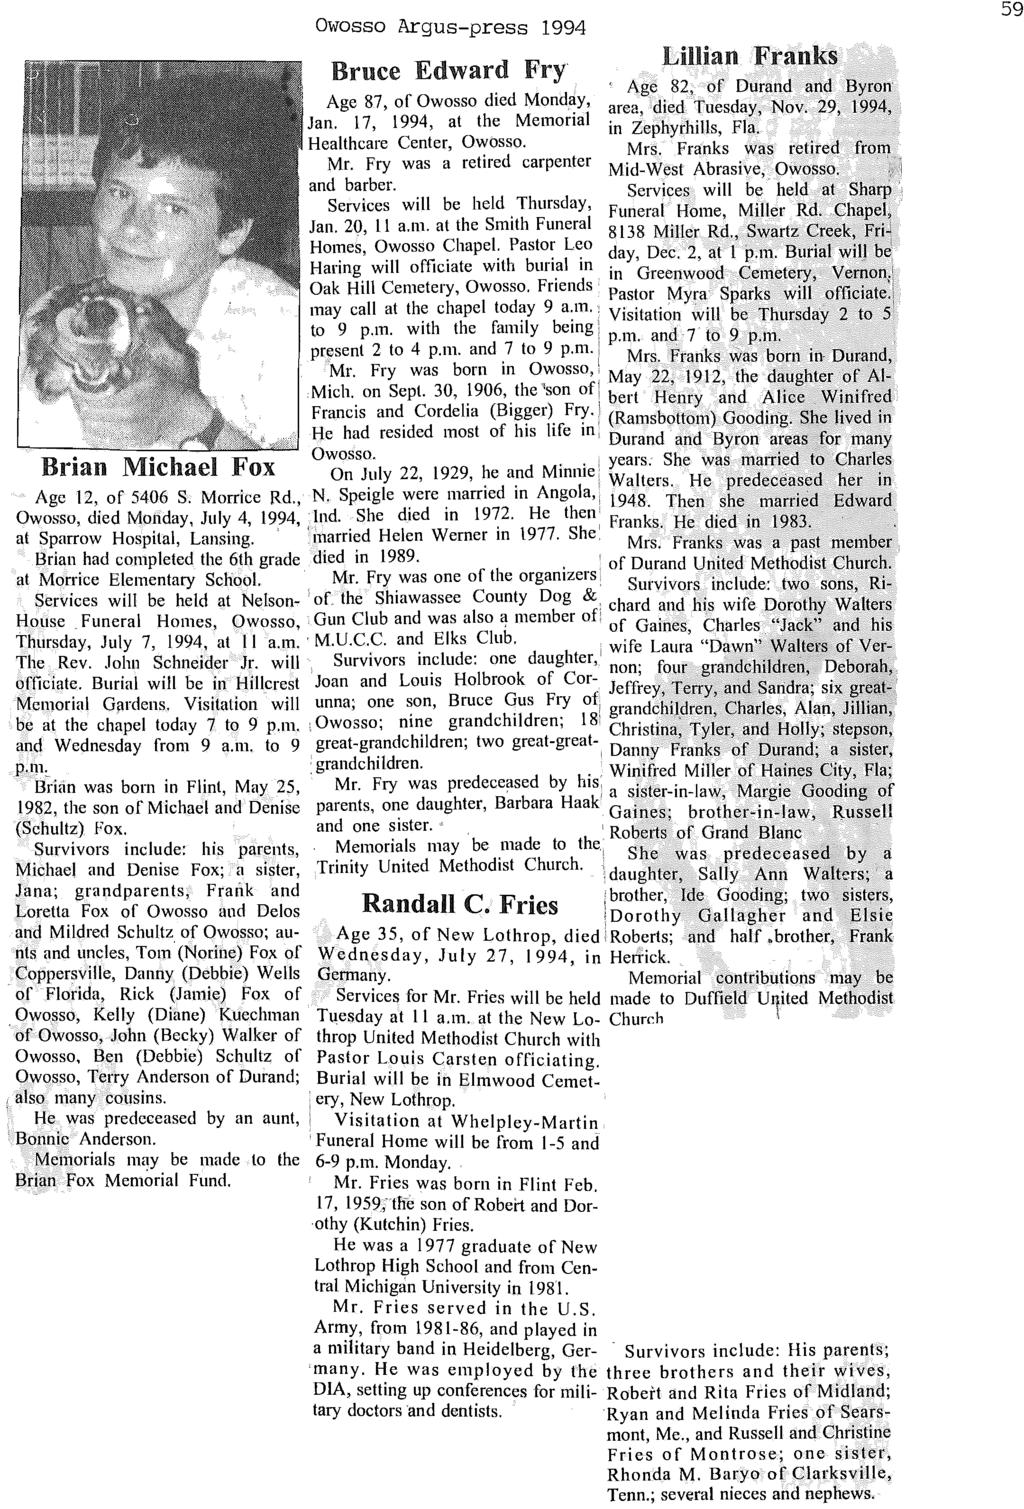 Brian Michael Fox Owosso Argus-press 1994 Bruce Edward Fry Lillian Franks Age 82, of Durand and Byron Age 87, of Owosso died Mond,ay, area, died Tuesday, Nov. 29, 1994, Jan.